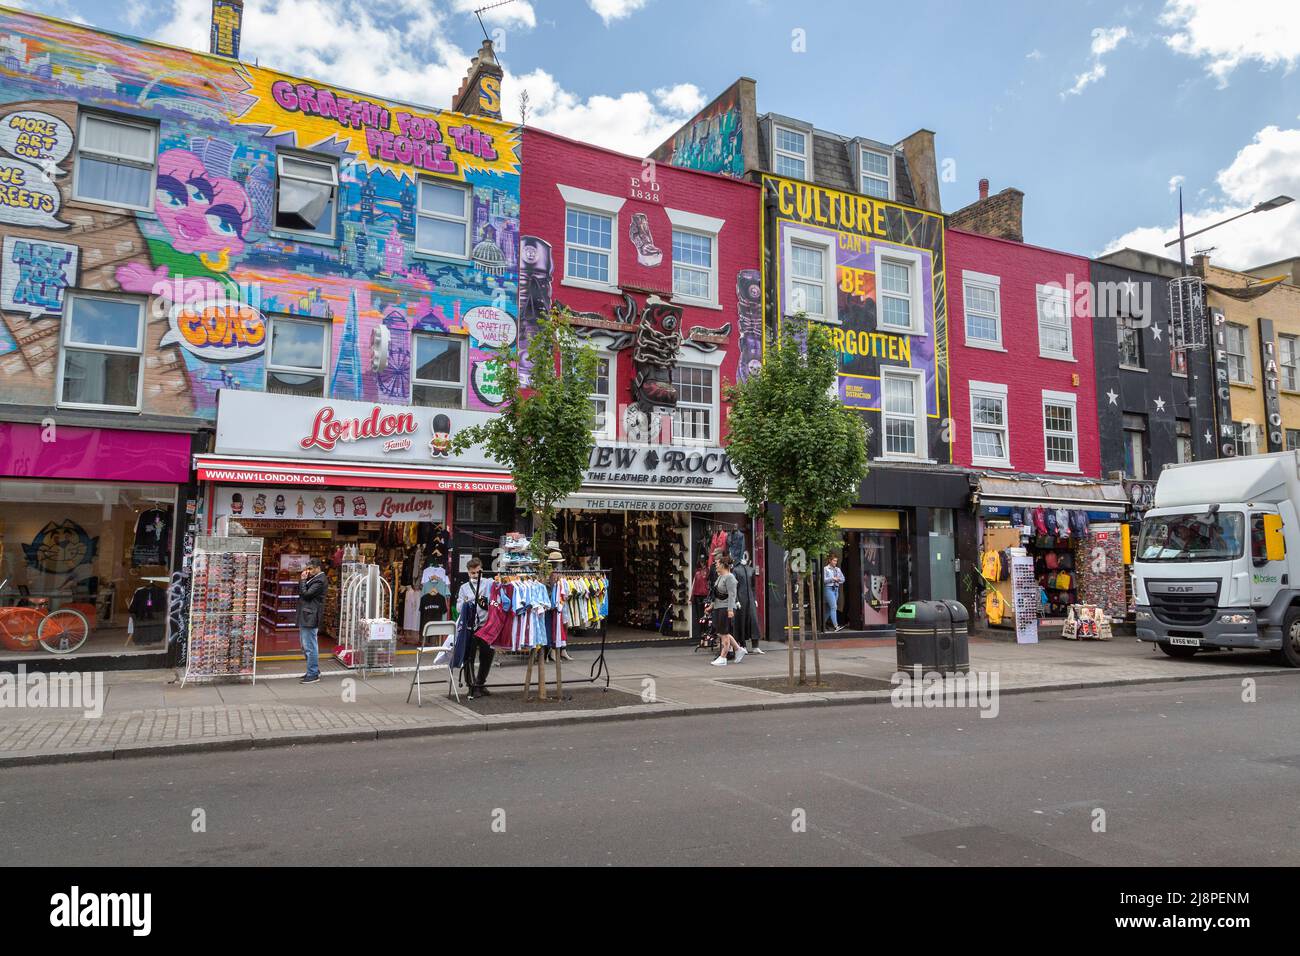 A row of colourful shops spread out along Camden High Street. This trendy area is home to many independent small businesses and retailers. Stock Photo